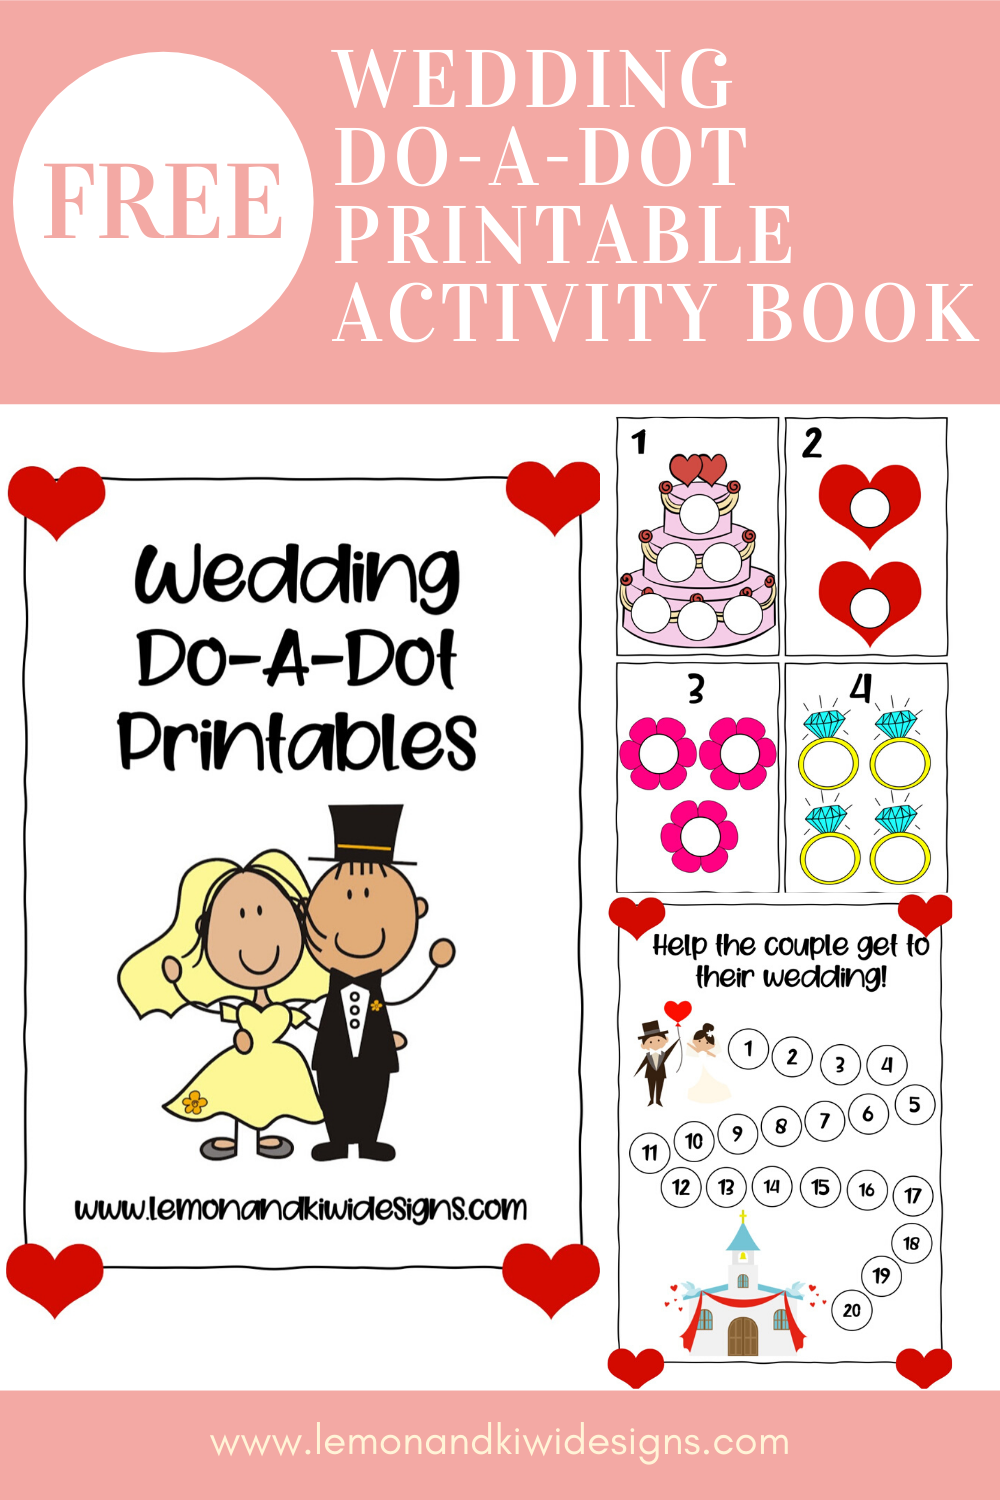 Wedding Do-A-Dot Printable Book: Free Activity Worksheets for Kids